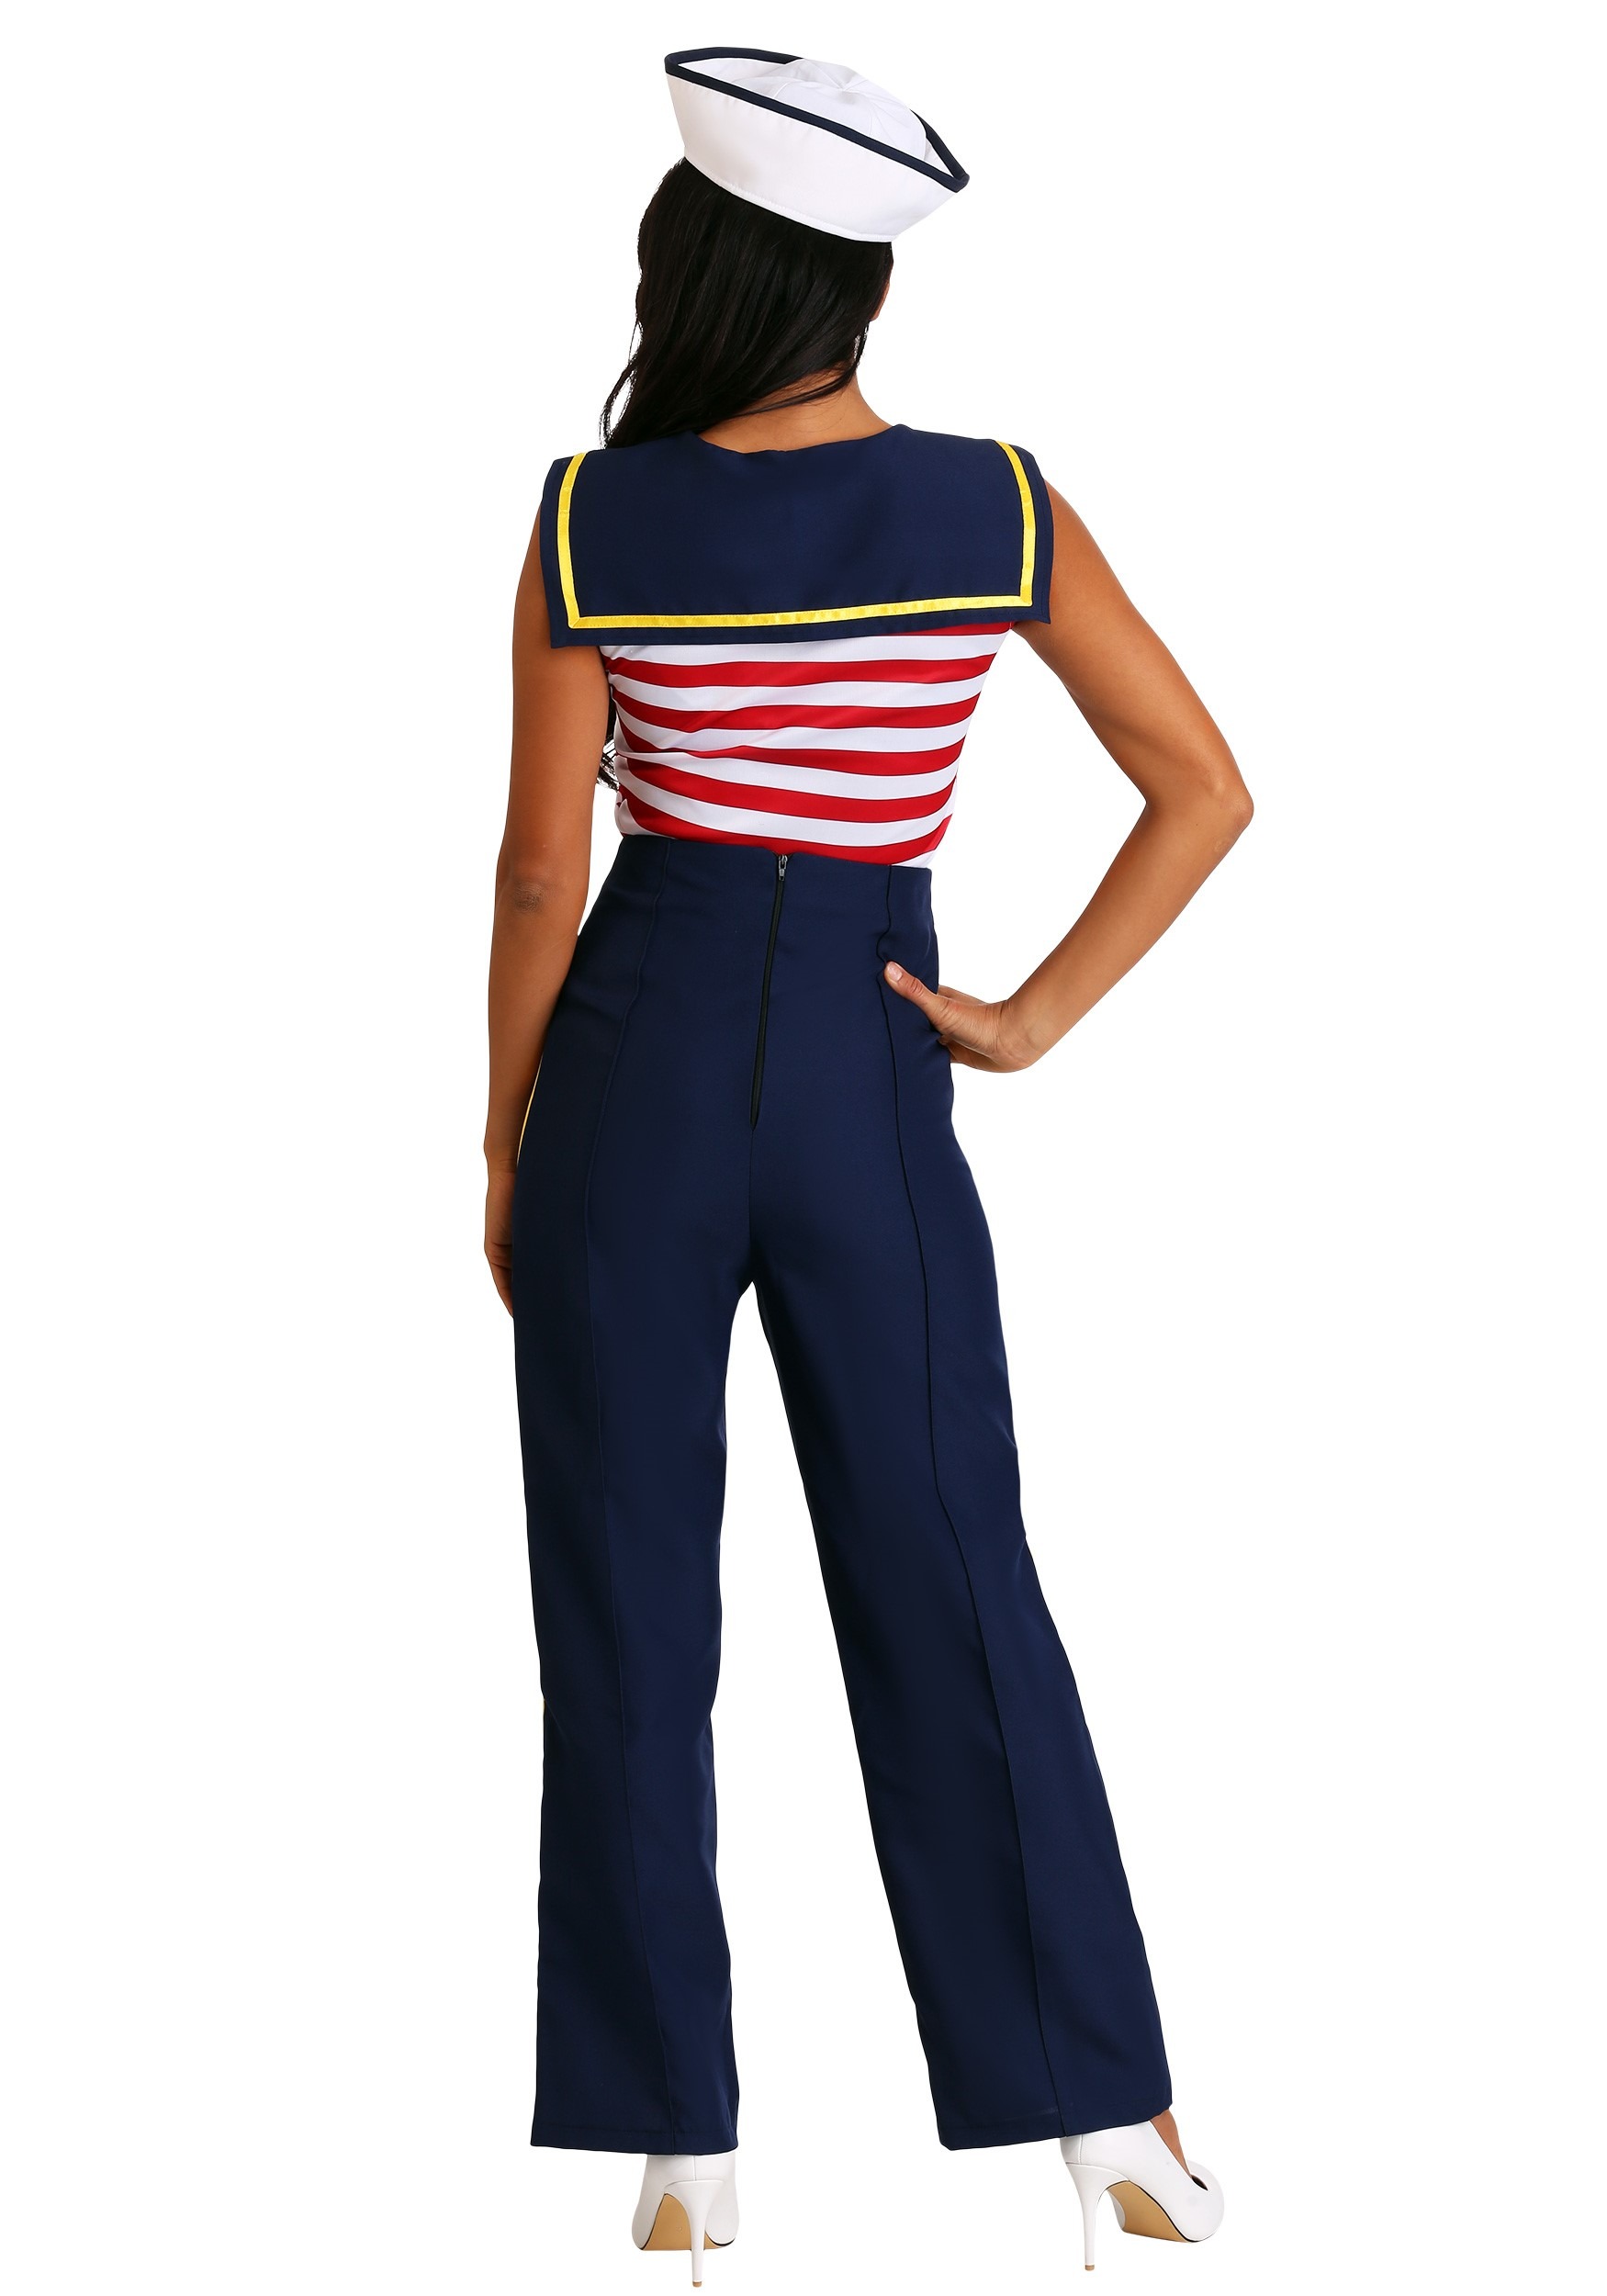 Perfect Up Sailor Costume for Plus Size Women 1X 2X